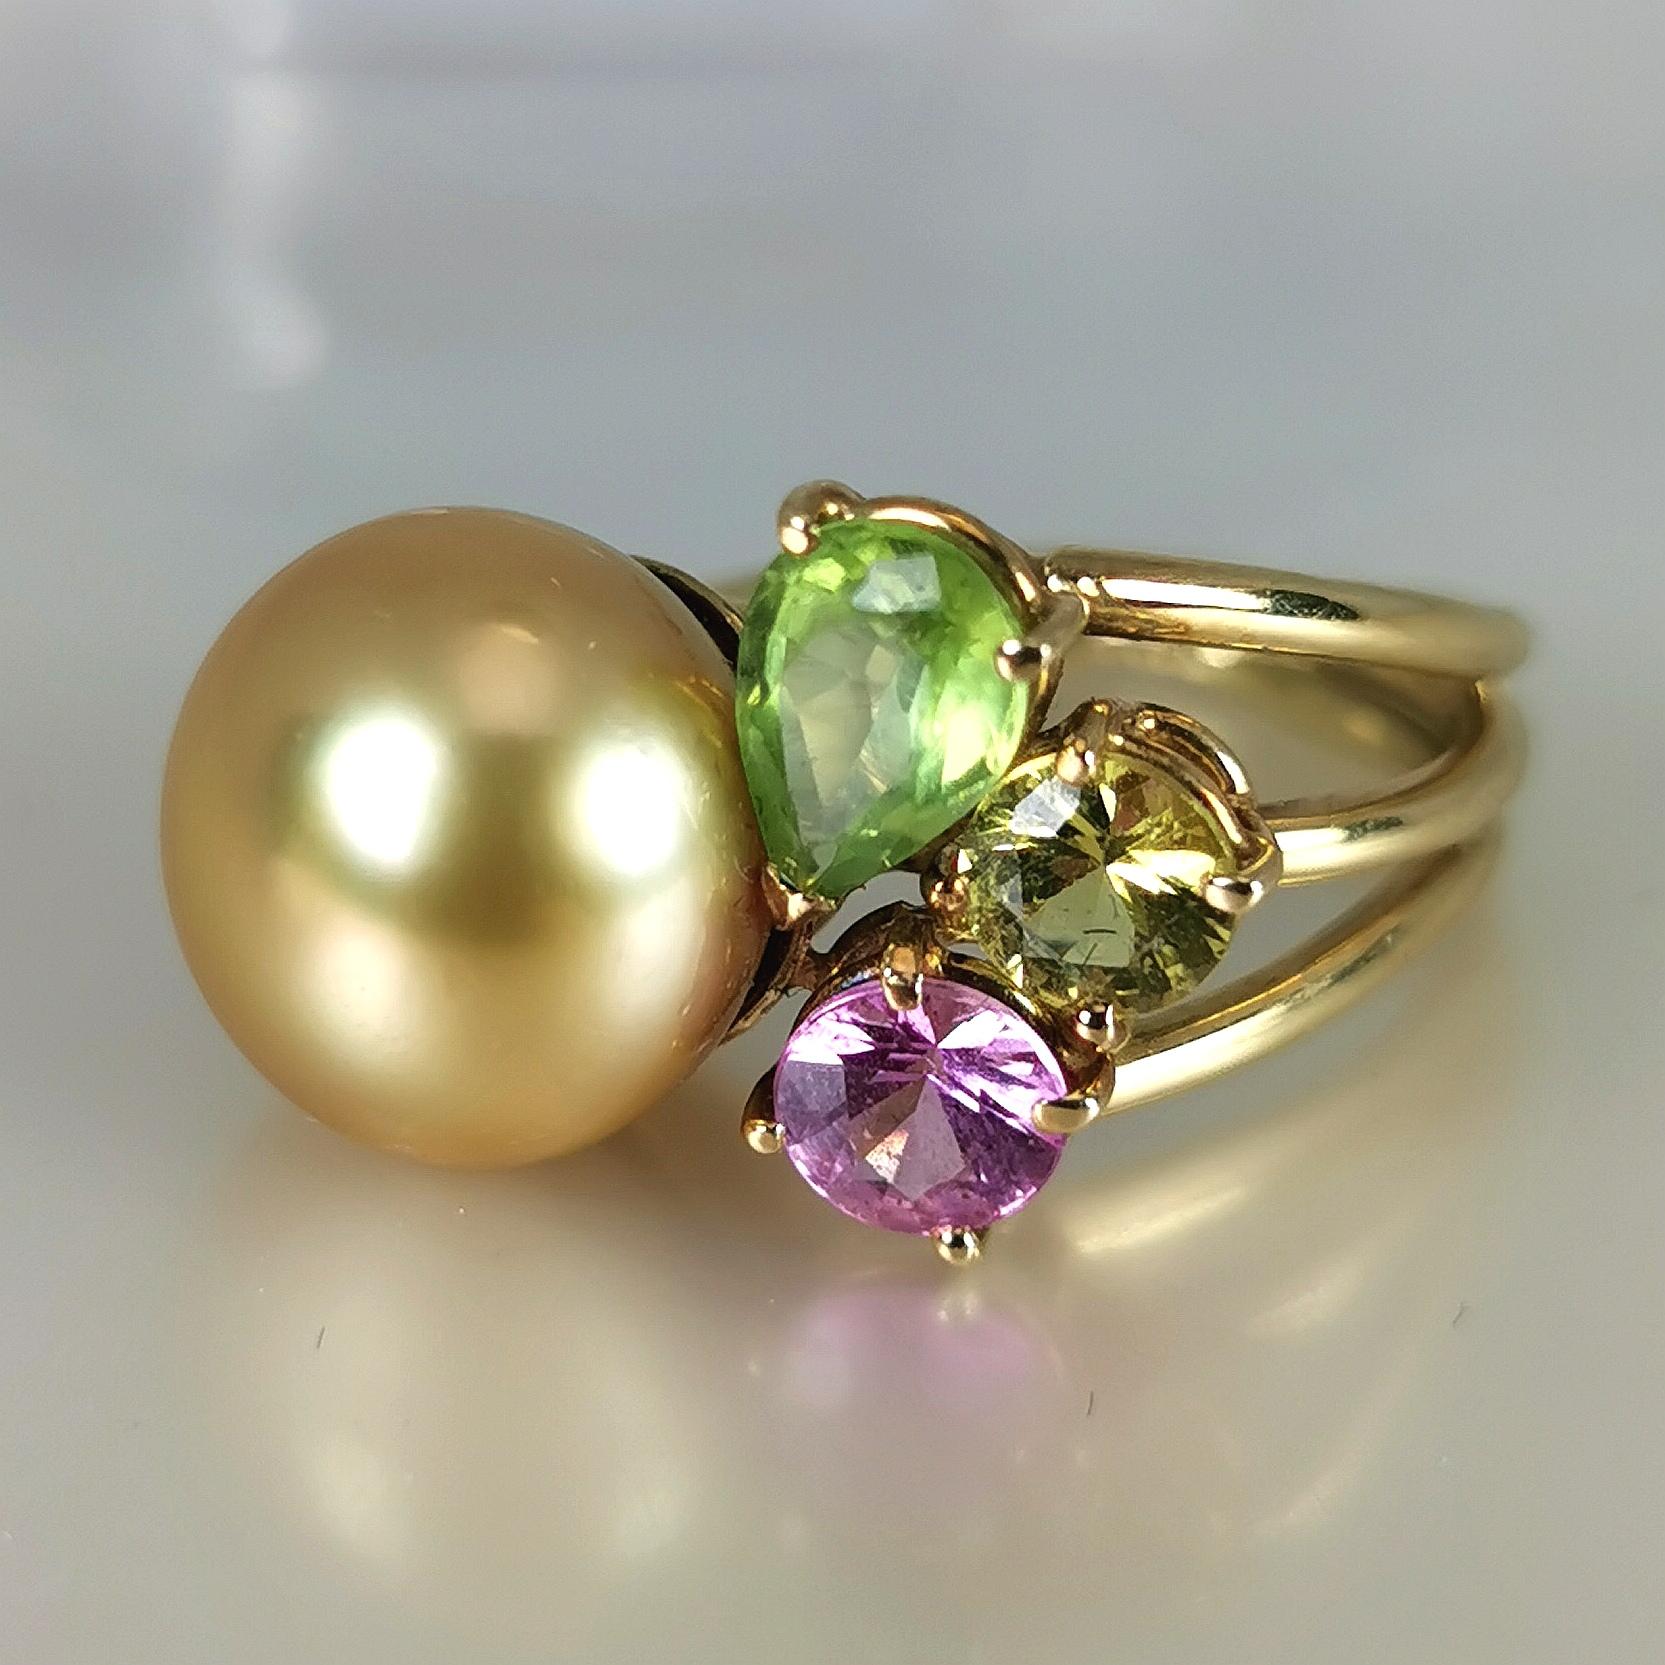 Beautiful Cocktail ring in yellow gold 18K with diamond, precious stones and a beautiful australian saltwater cultured pearl Southsea golden natural colour.

Total 2 diamonds brillant cut 0,09cts (F/VS2)
Total 3 sapphires (pink & yellow) round cut